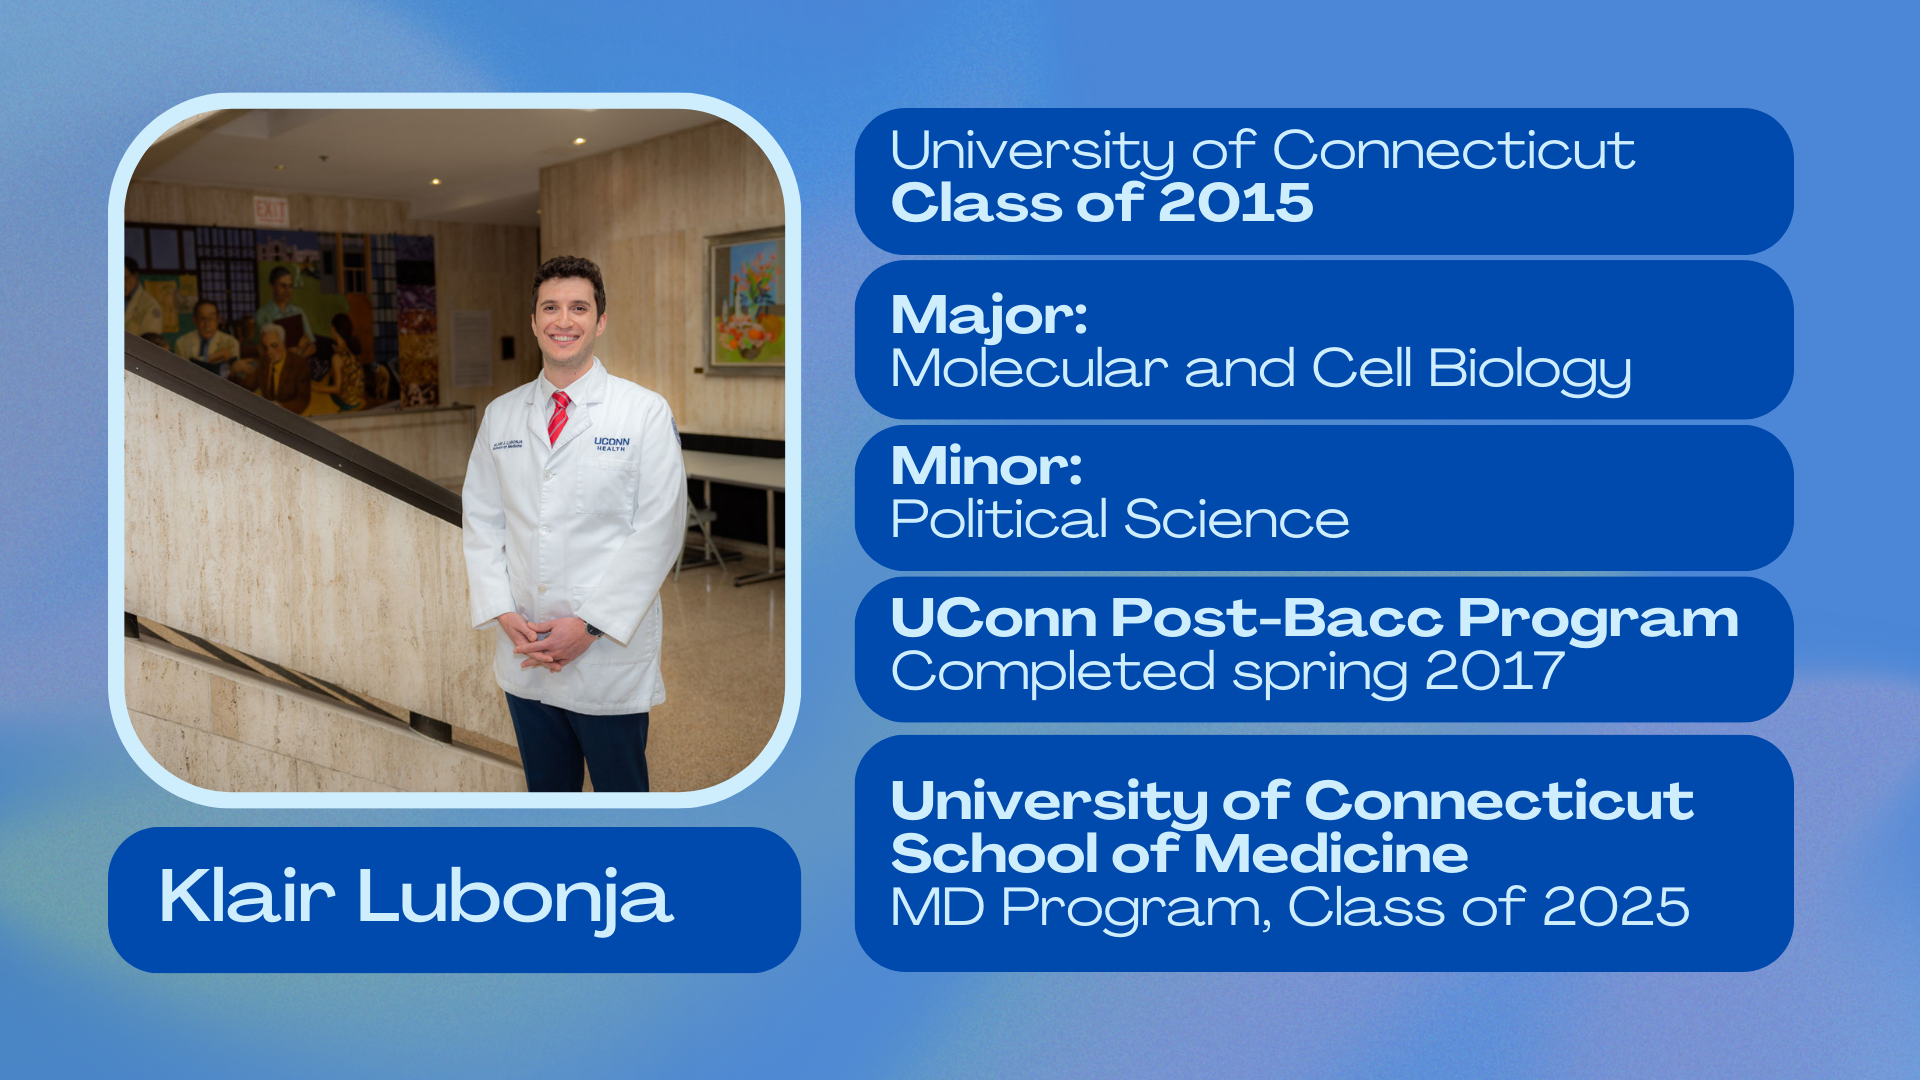 Klair Lubonja; University of Connecticut class of 2015; Major: molecular and cell biology; Minor; Political Science; UConn Post-Bacc program completed spring 2017; University of Connecticut School of Medicine